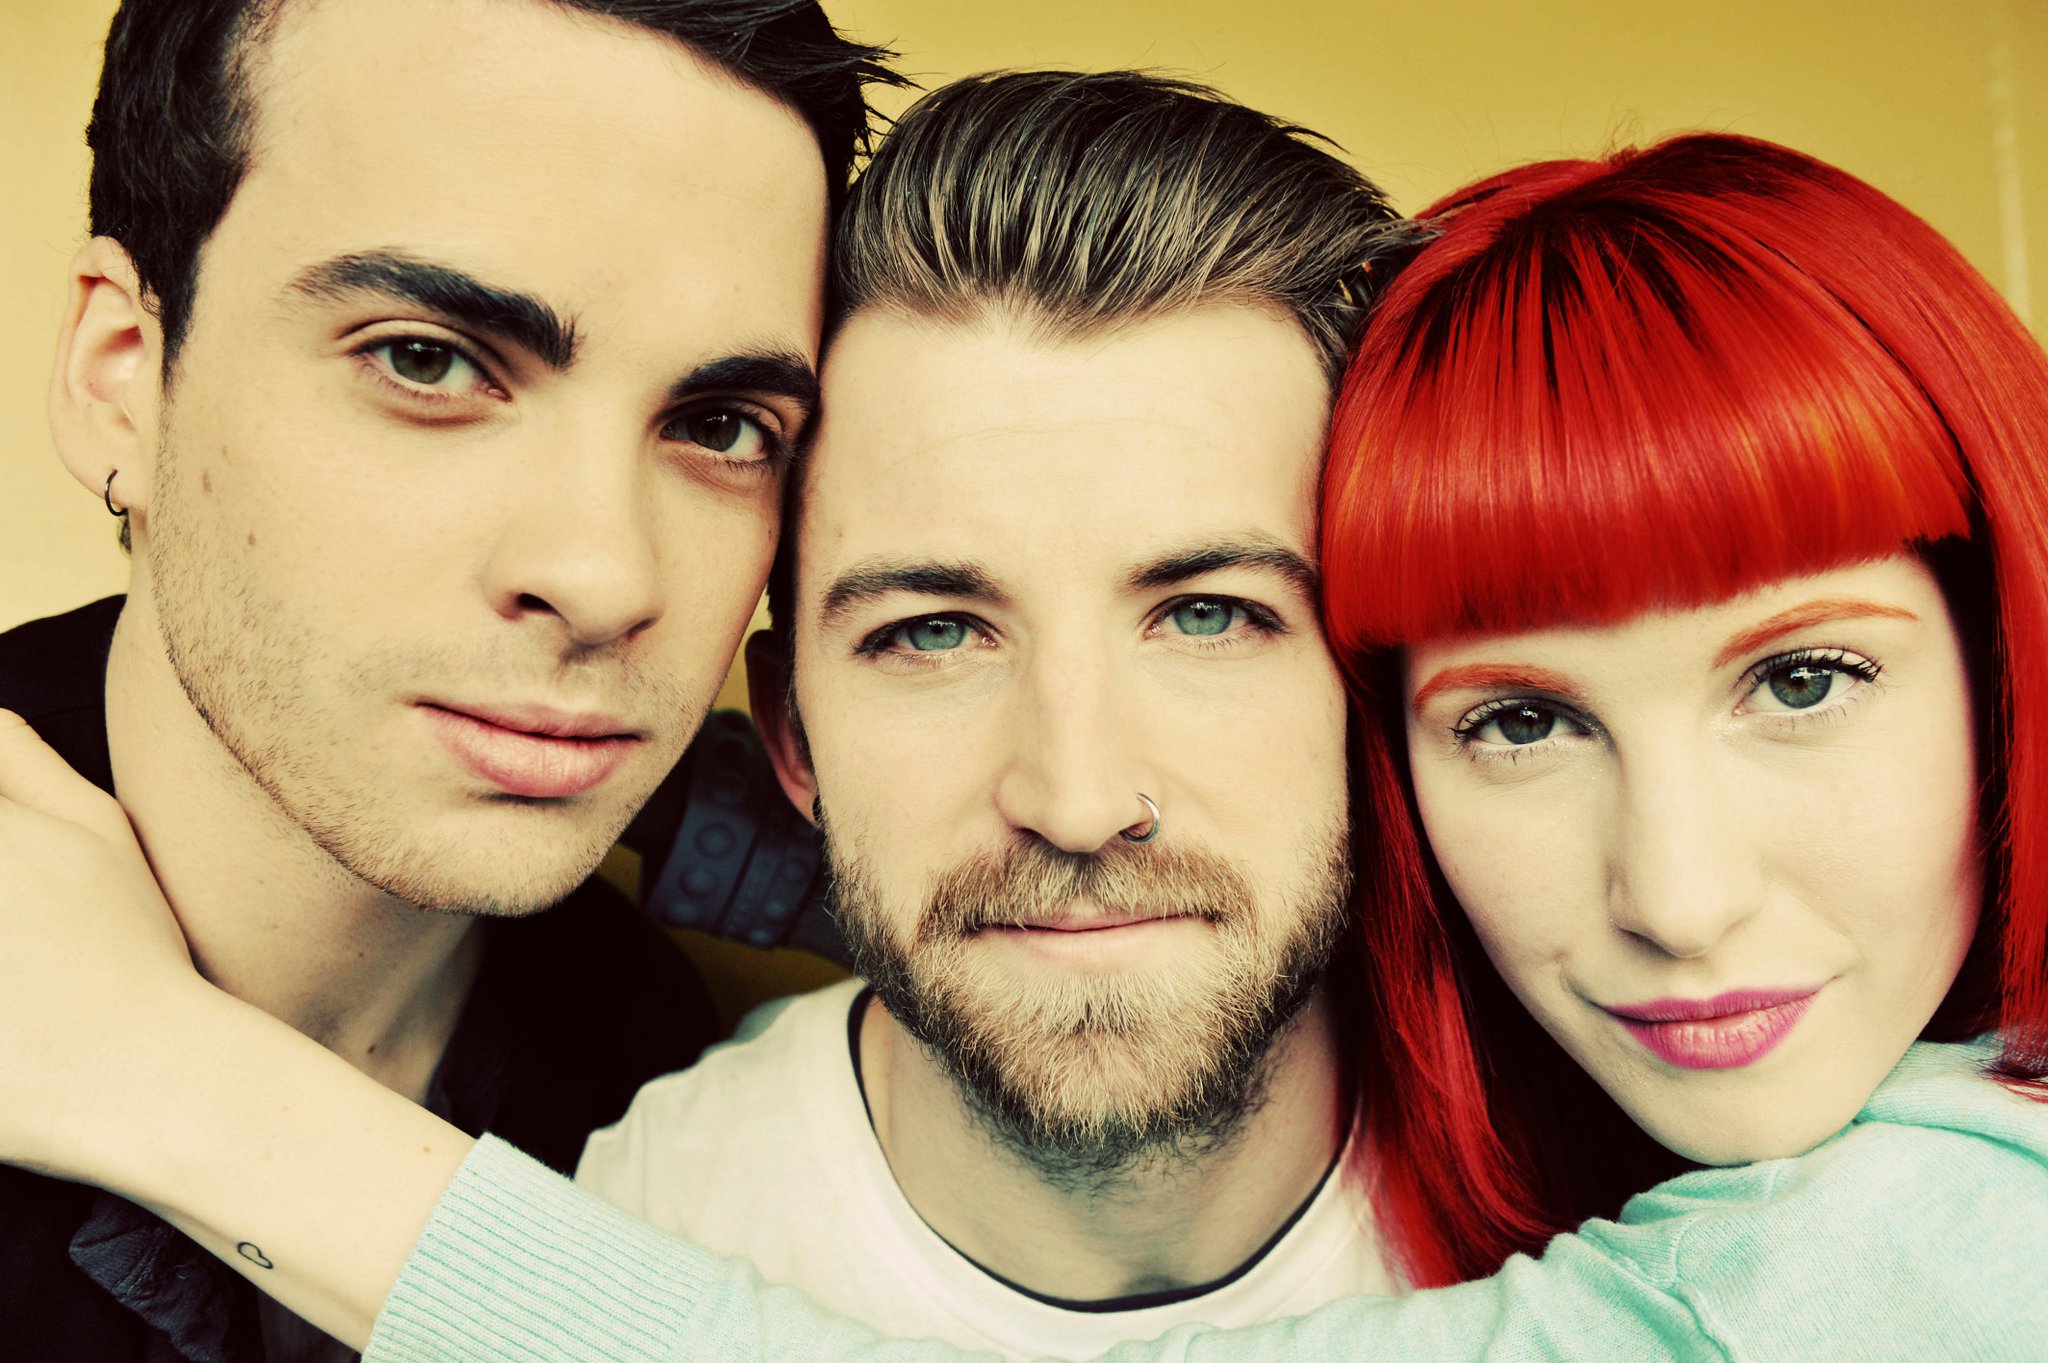 Paramore's self-titled album on sale at Google Play - Listen Here Reviews